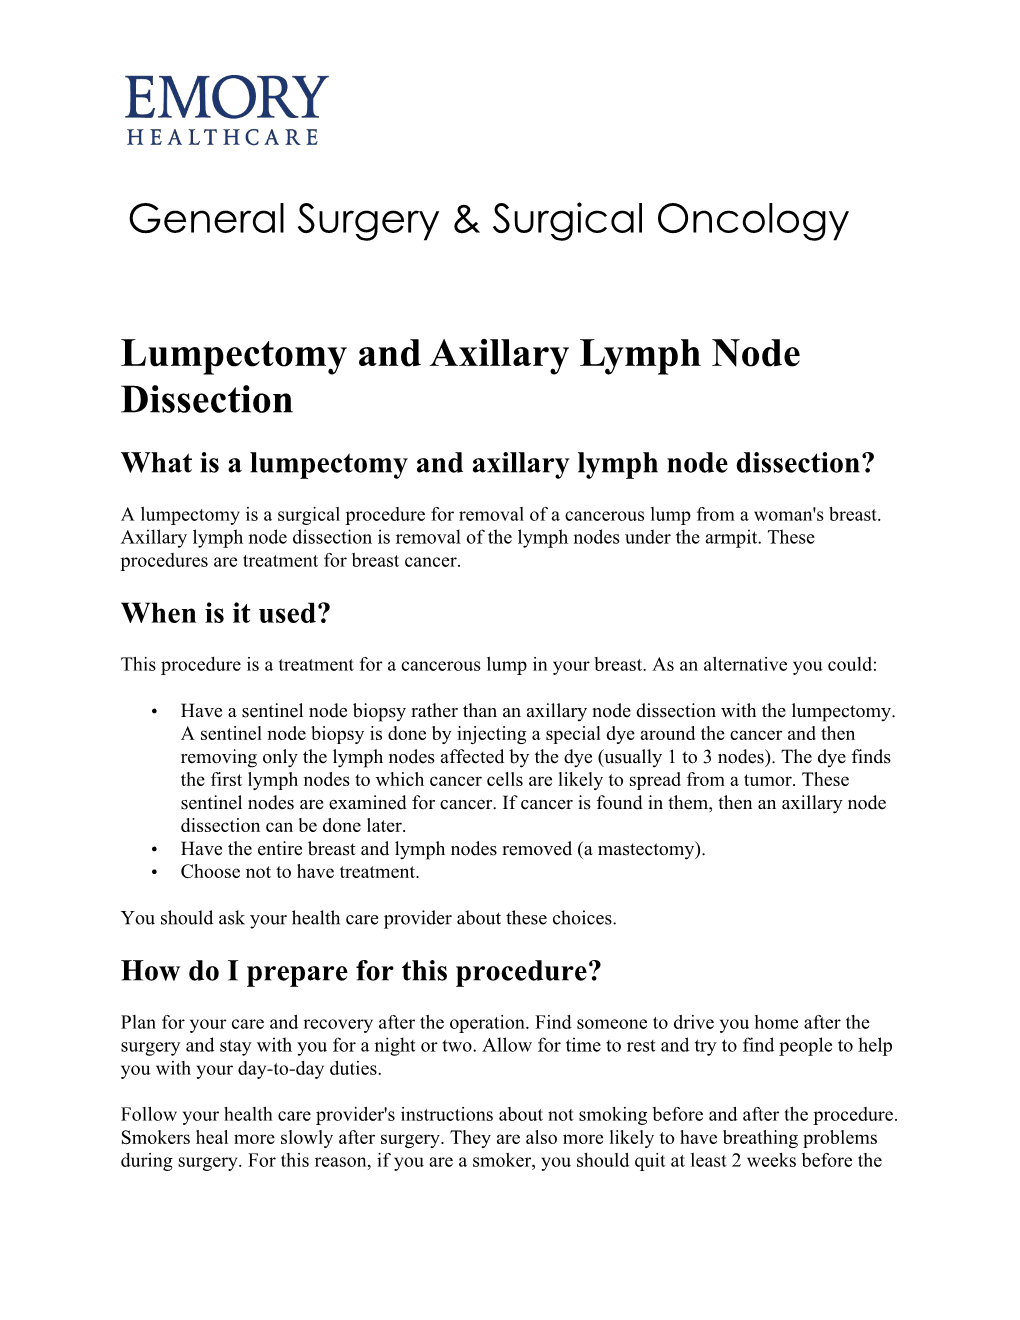 Lumpectomy and Axillary Lymph Node Dissection What Is a Lumpectomy and Axillary Lymph Node Dissection?